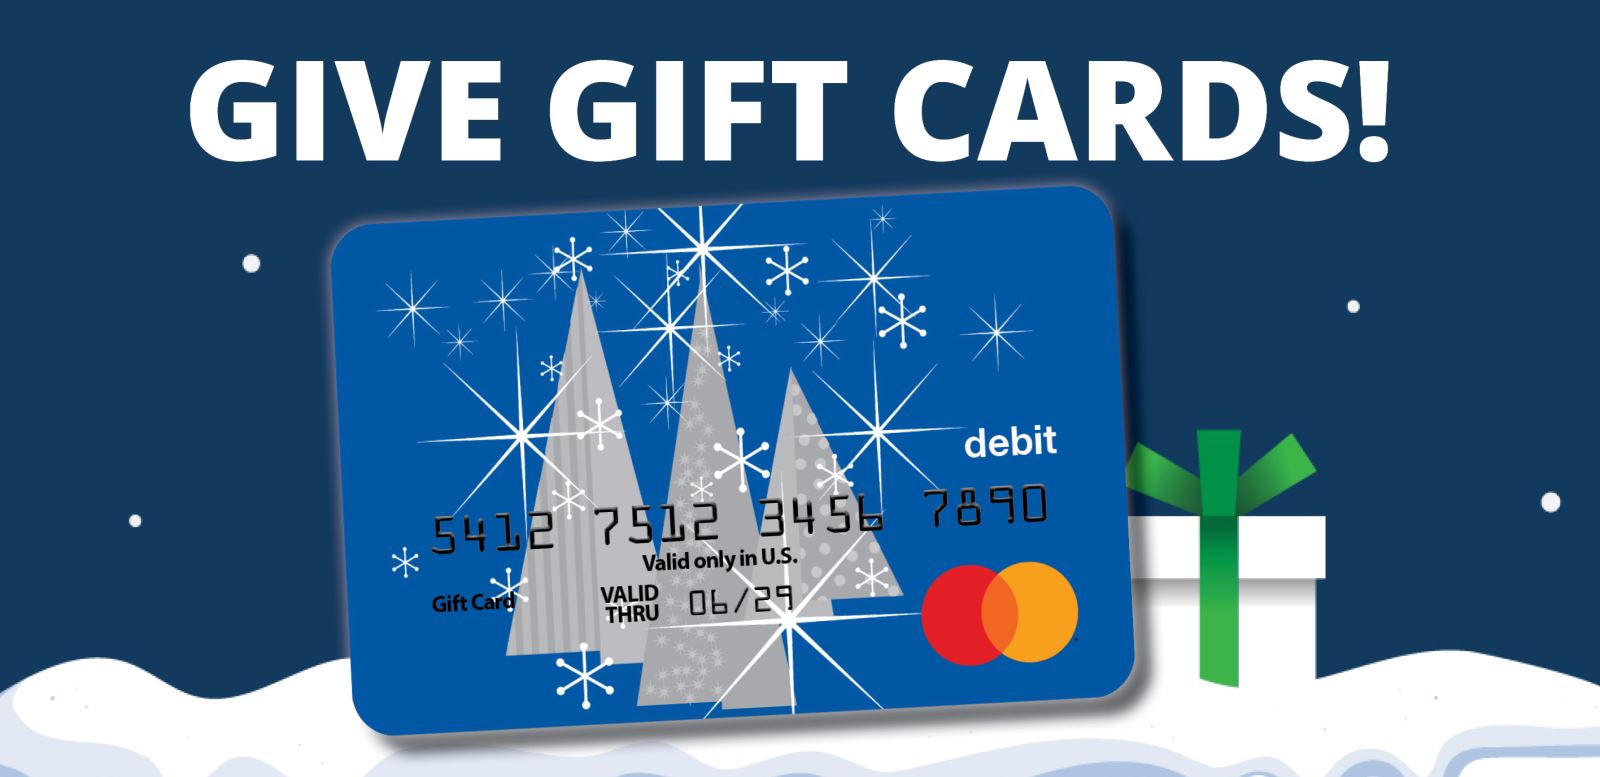 Give Gift Cards this Year!